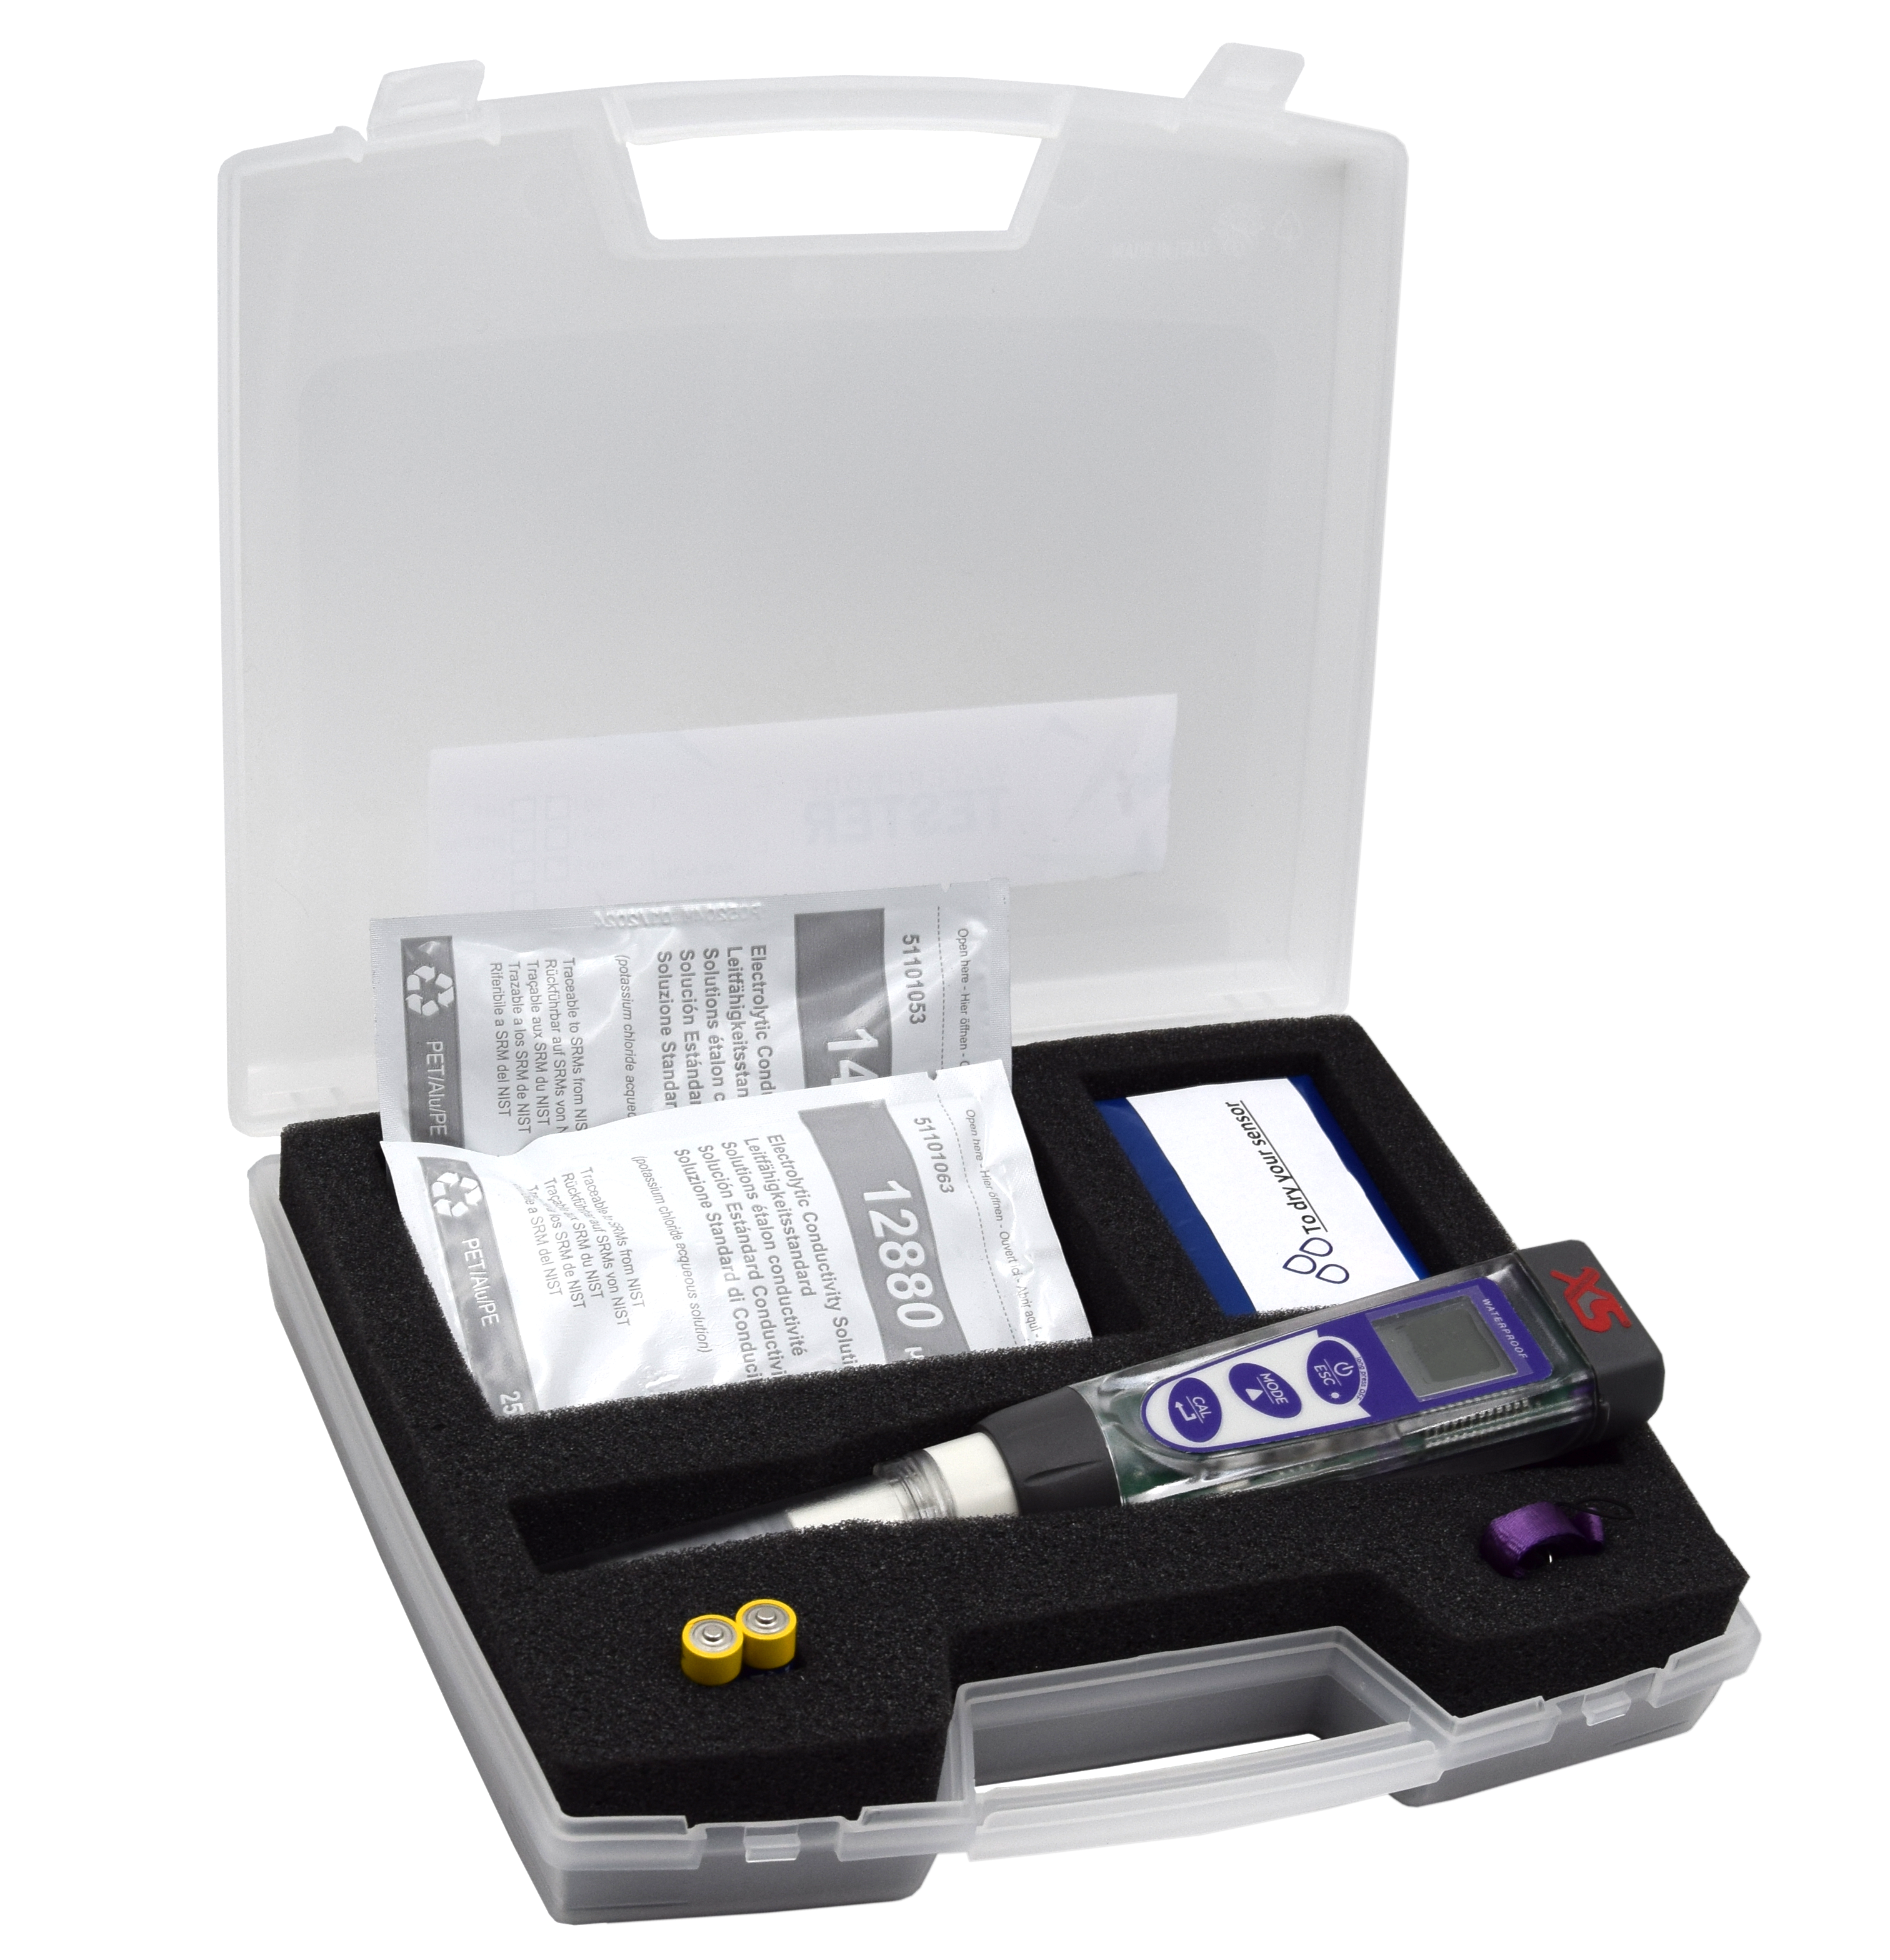 XS COND 5 Tester in carrying case  –  Handmeter for Conductivity/TDS/Salinity/Temperature